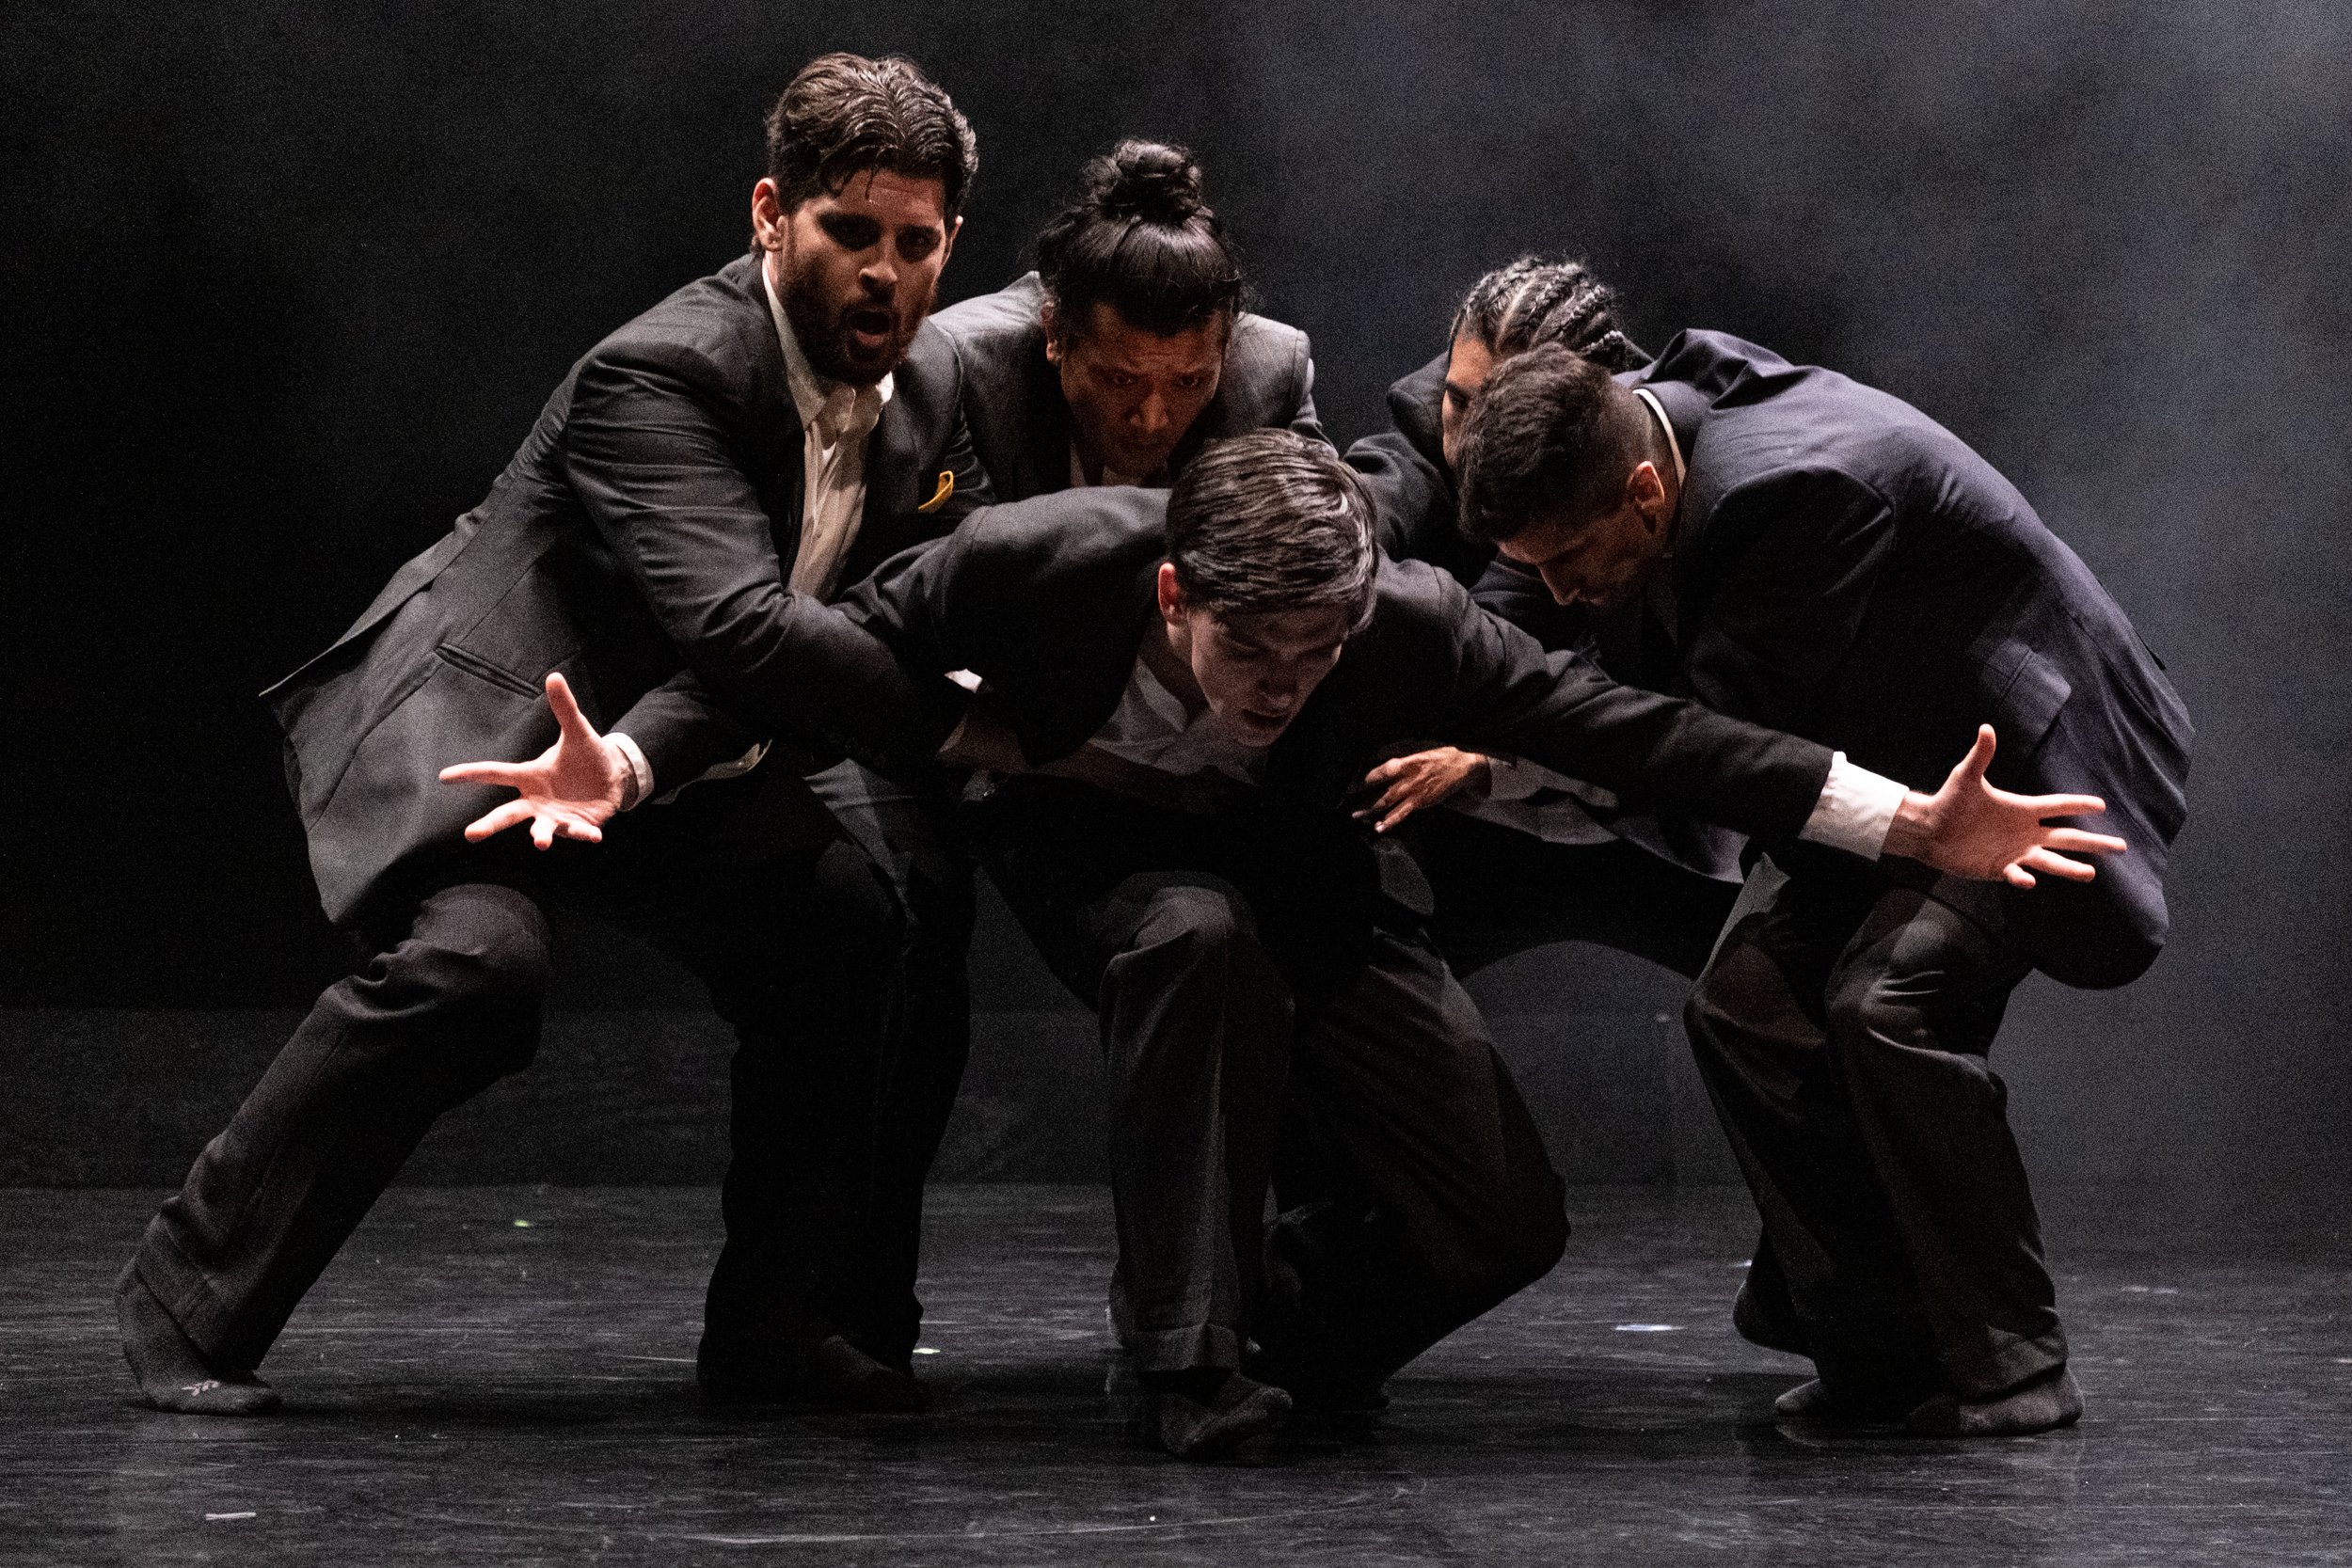  (L to R) Dancers Michael Hamilton, Daveth Cheth, Abdiel Montes Vergara and Nick Albuja surround Simon Lathrop (center) as they rehearse a piece choreographed by Seda Aybay for the Santa Monica College Contemporary Dance Performance Synapse at BroadS